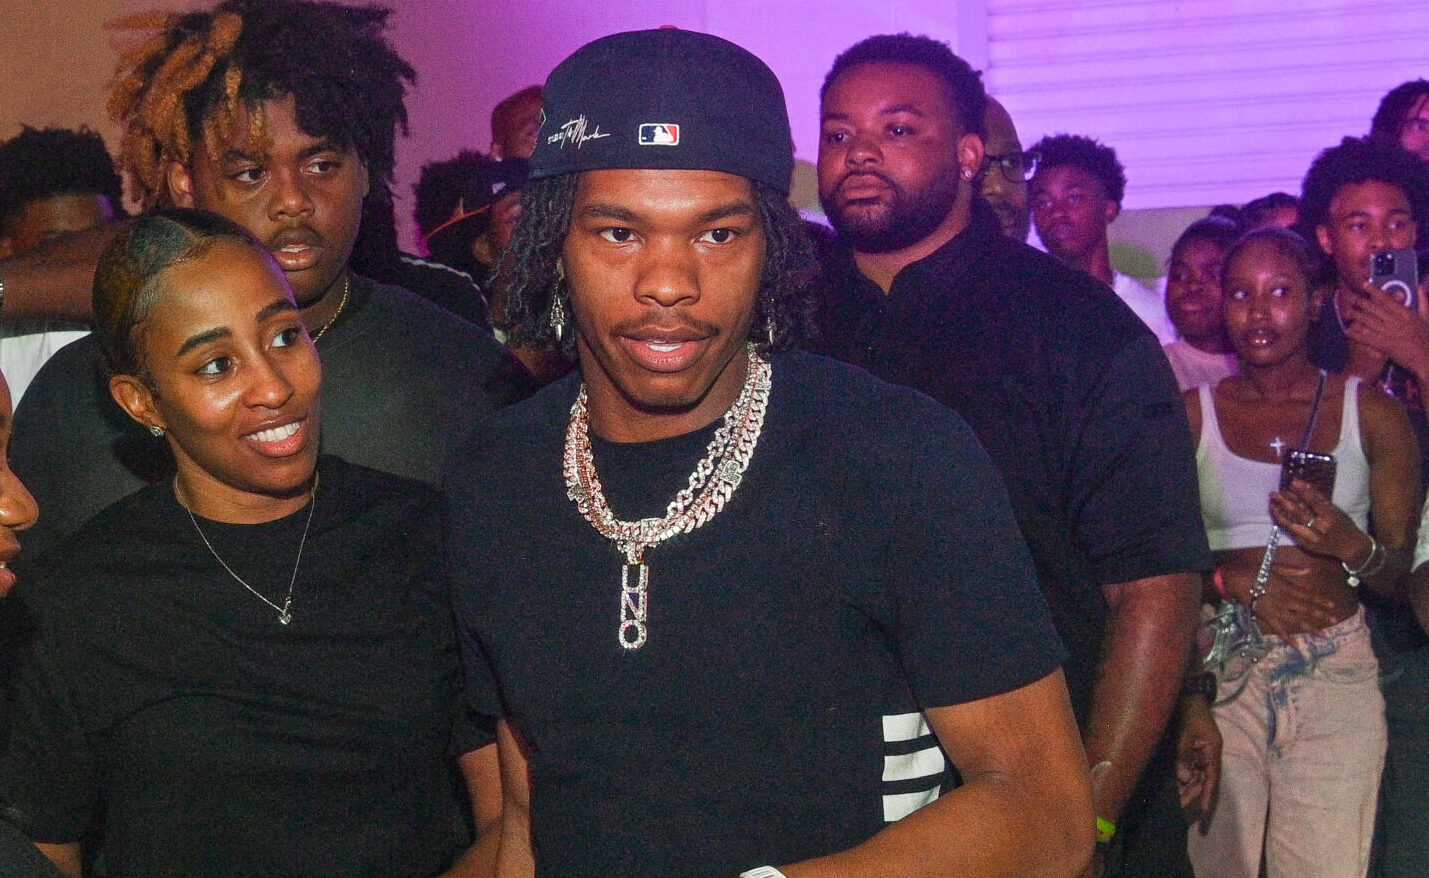 Victim Of Lil Baby Concert Shooting Reveals His Health Following The Incident